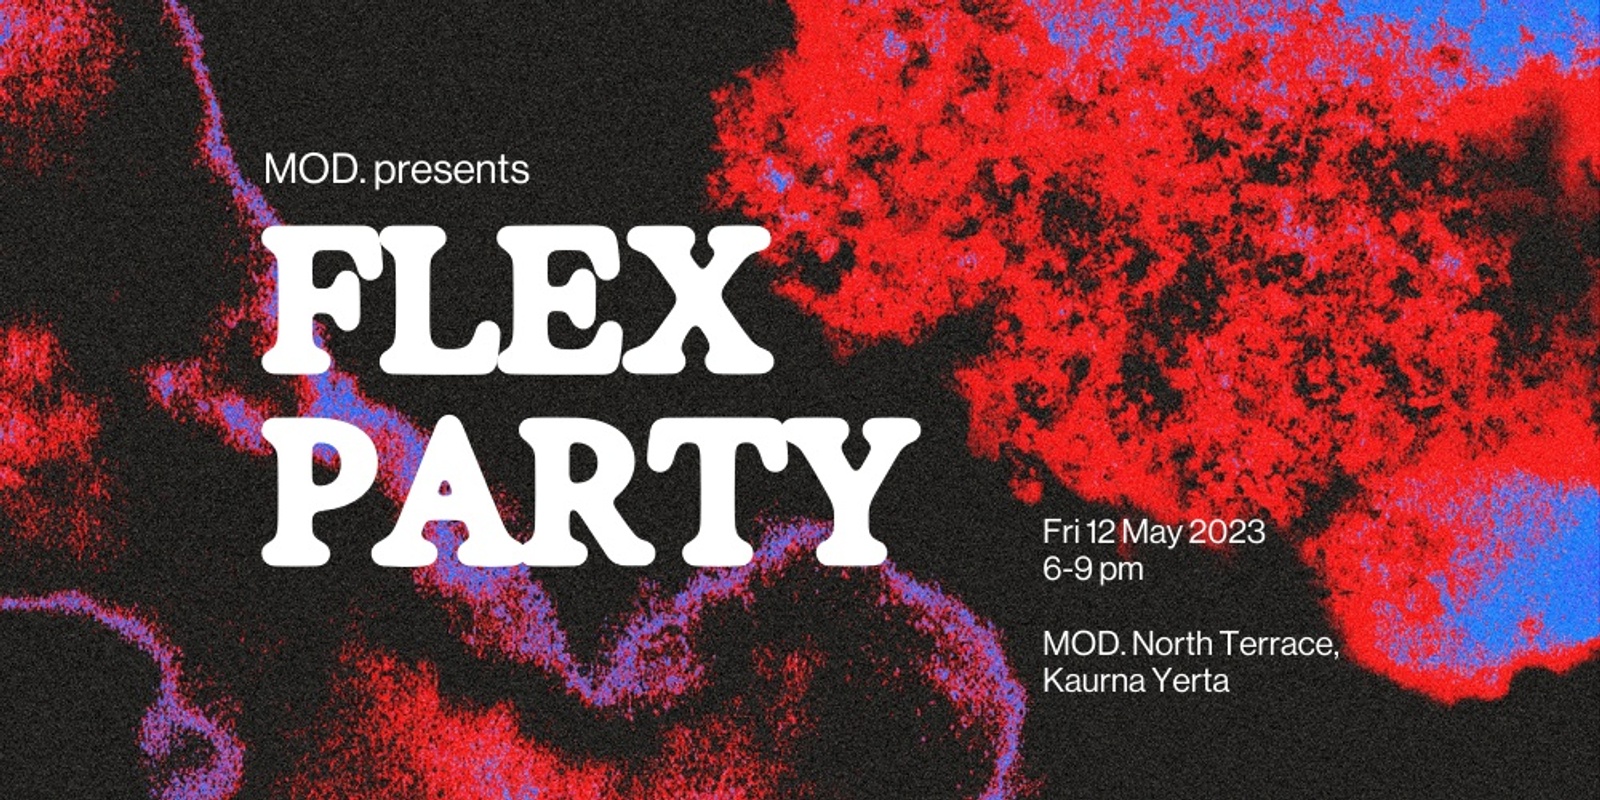 Banner image for FLEX PARTY